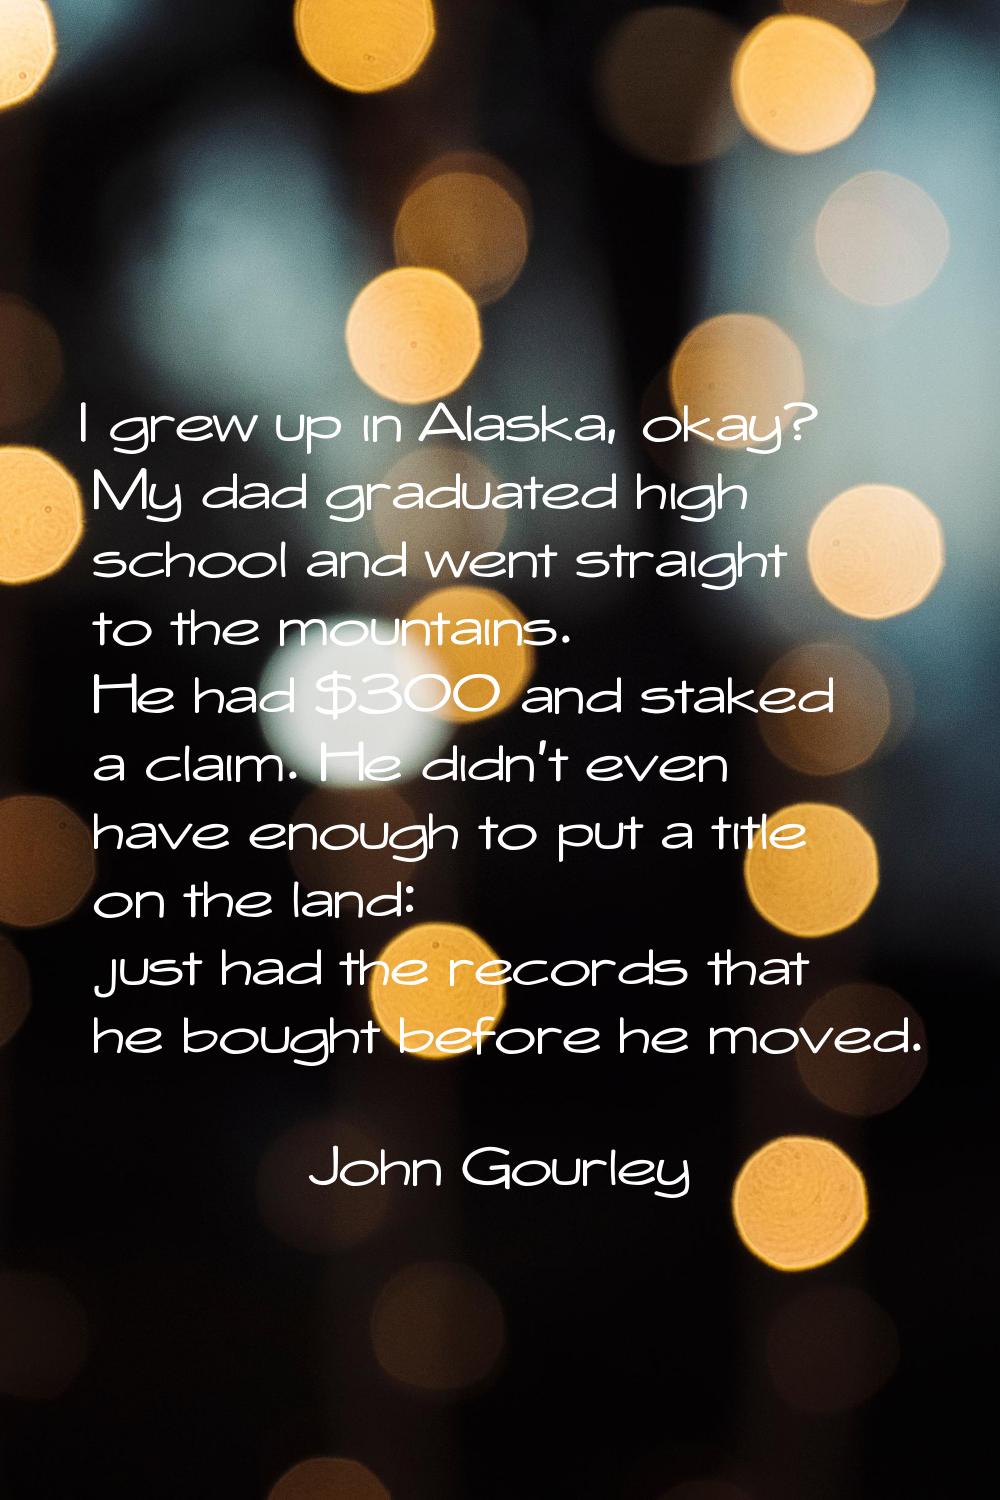 I grew up in Alaska, okay? My dad graduated high school and went straight to the mountains. He had 